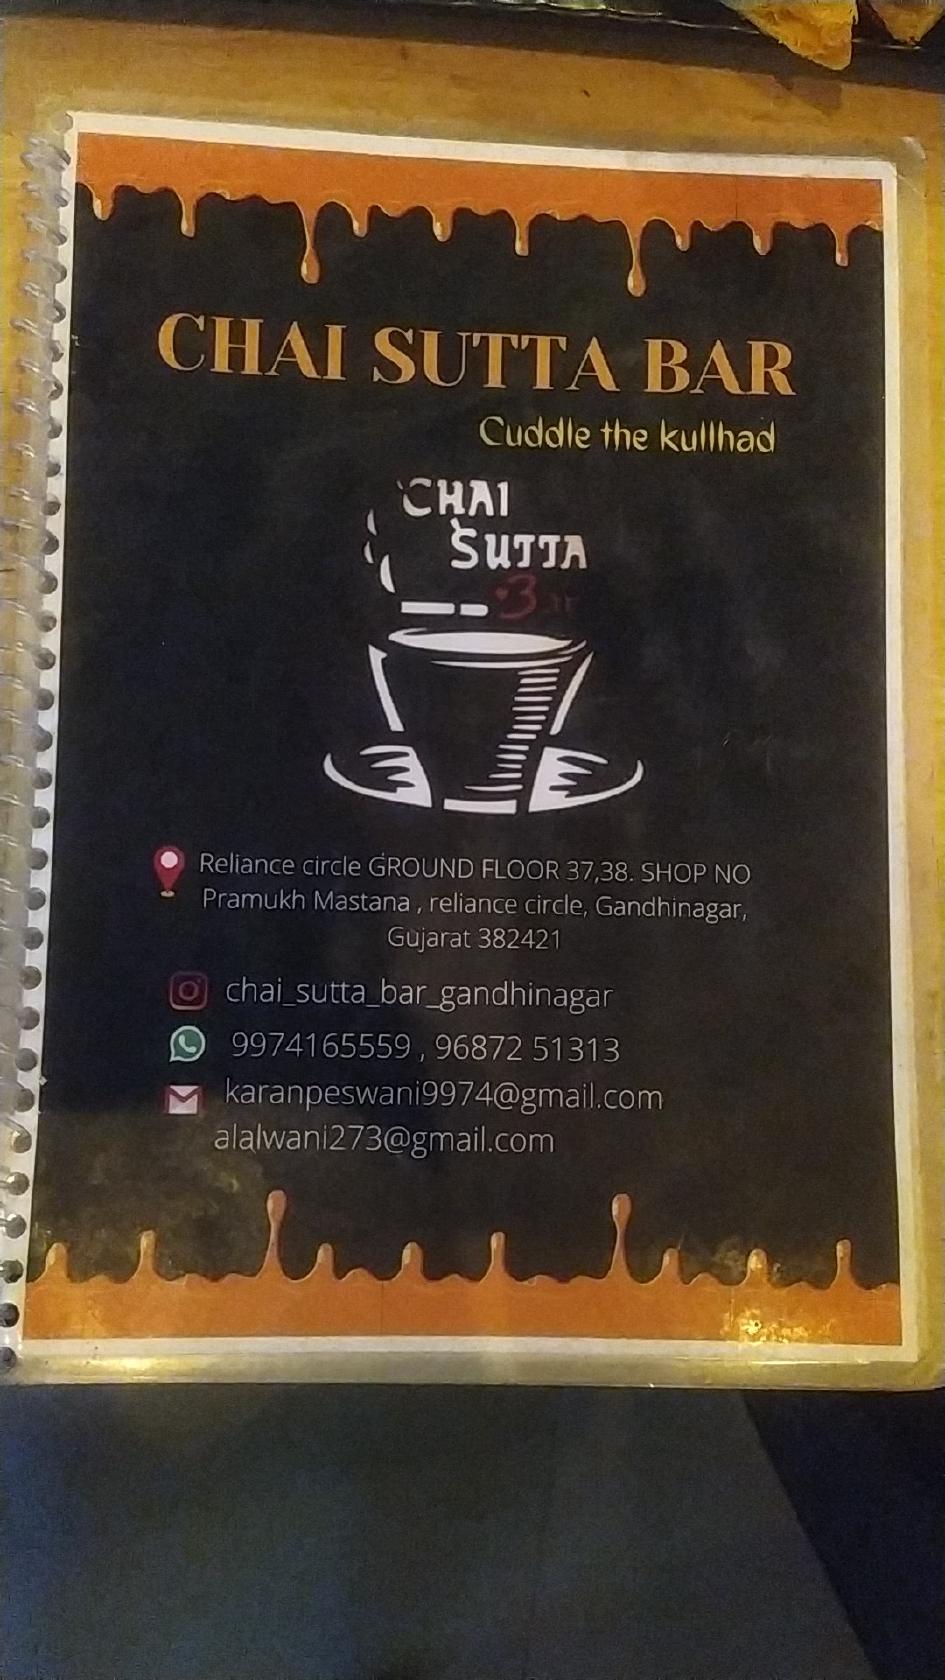 Chai Sutta Bar opens 300th outlet, launches summer special beverages -  Afternoonnews